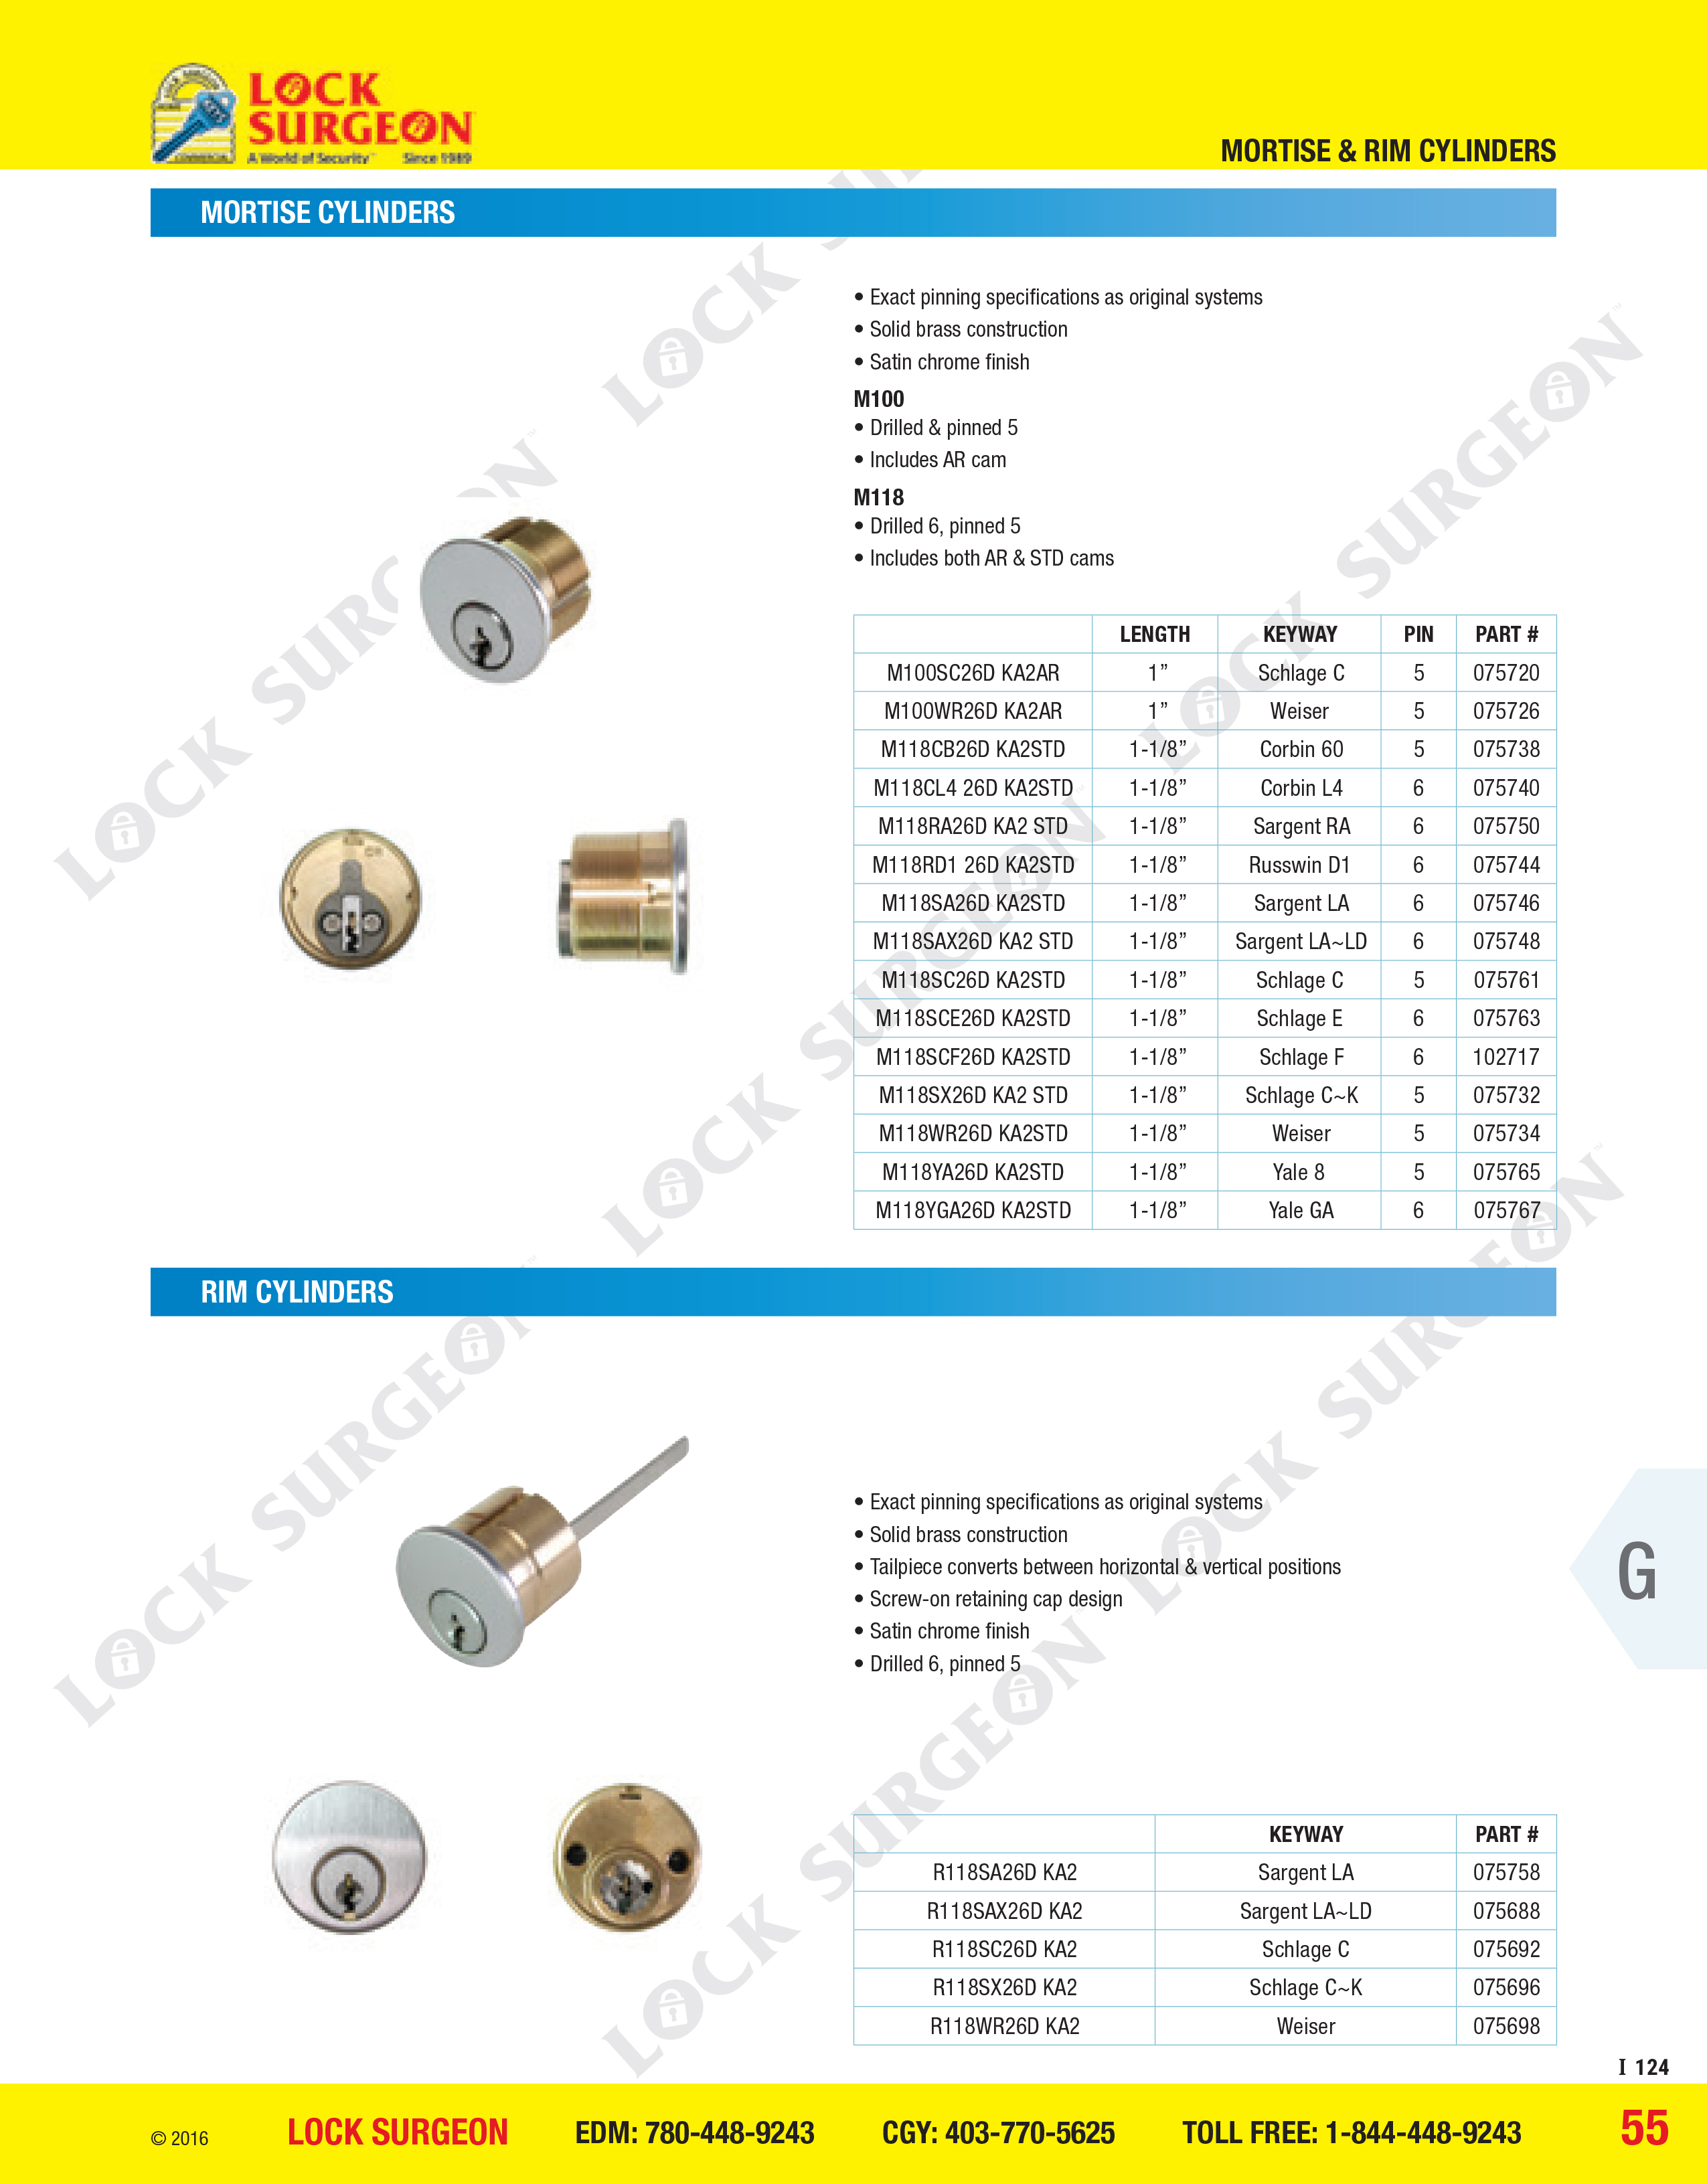 St. Albert GMS mortise and rim cylinders solid brass construction satin chrome finish.